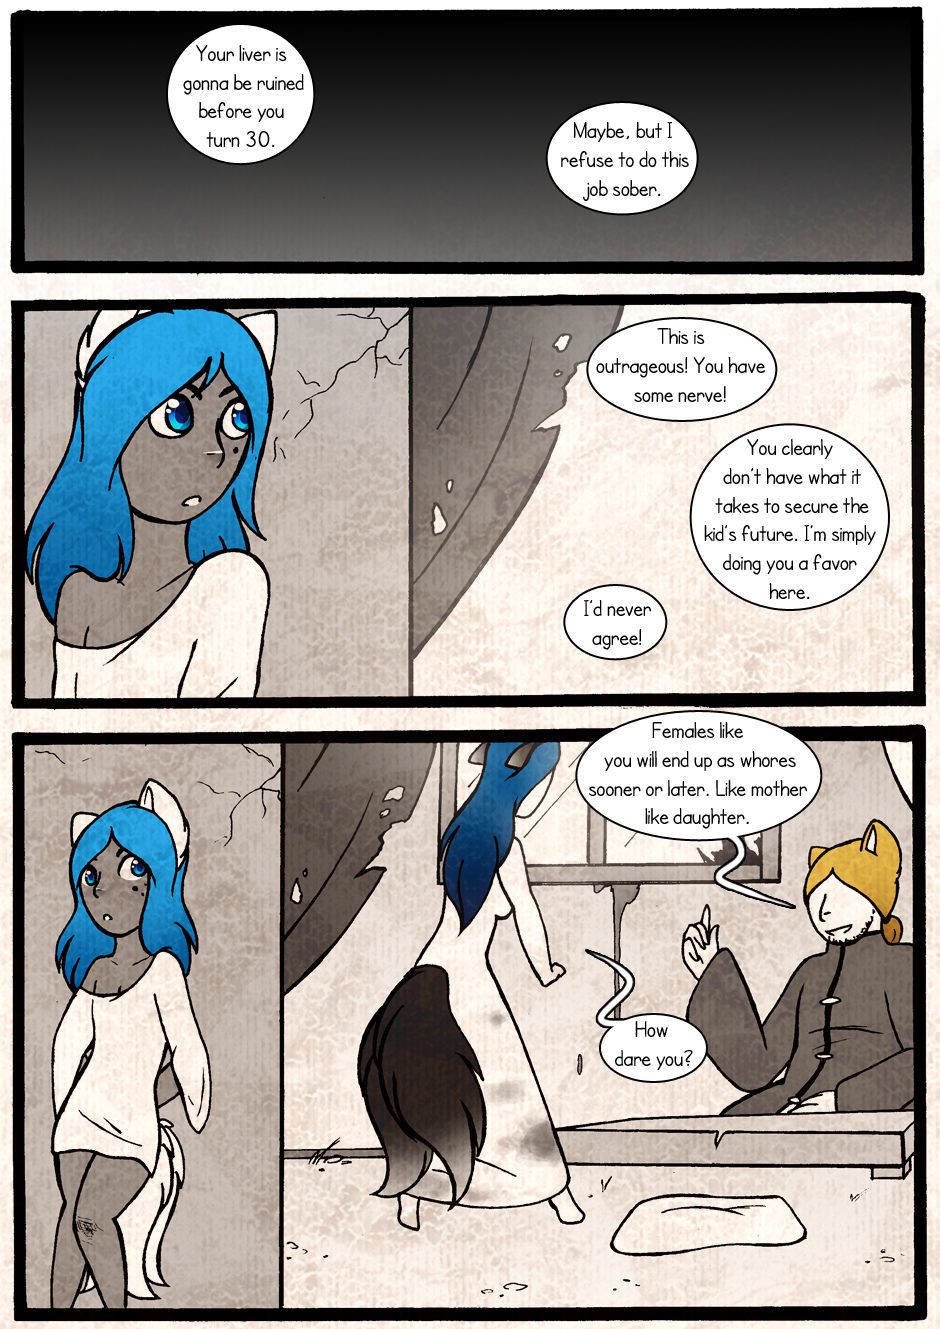 [Jeny-jen94]Between Kings and Queens[ongoing] 69